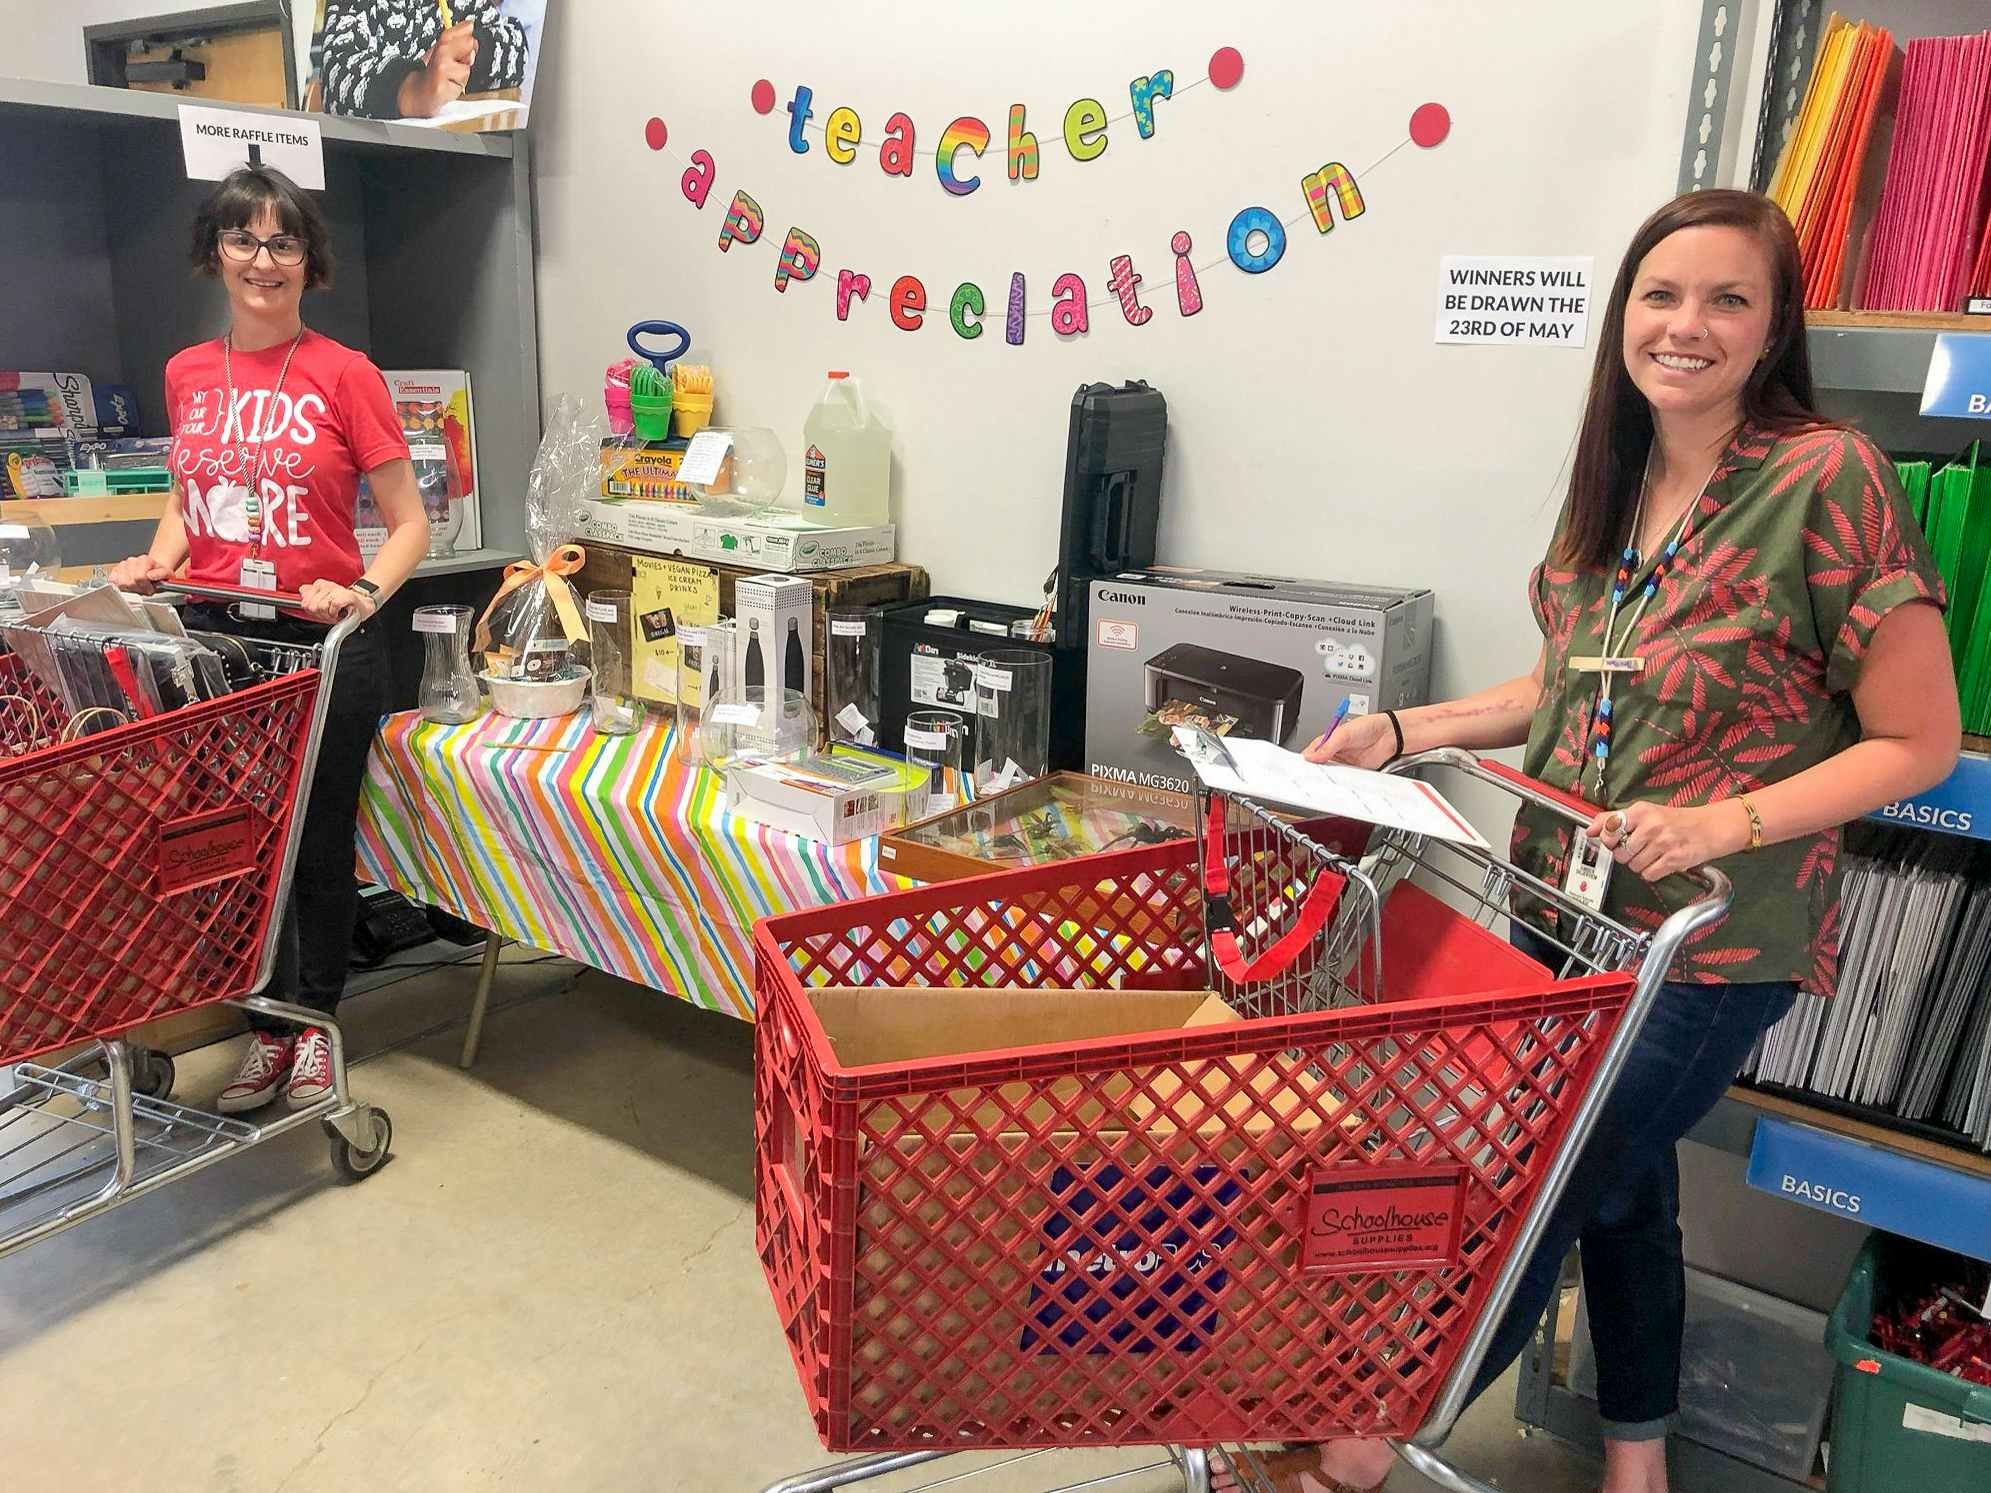 Two teachers pushing shopping carts in Schoolhouse Supplies.